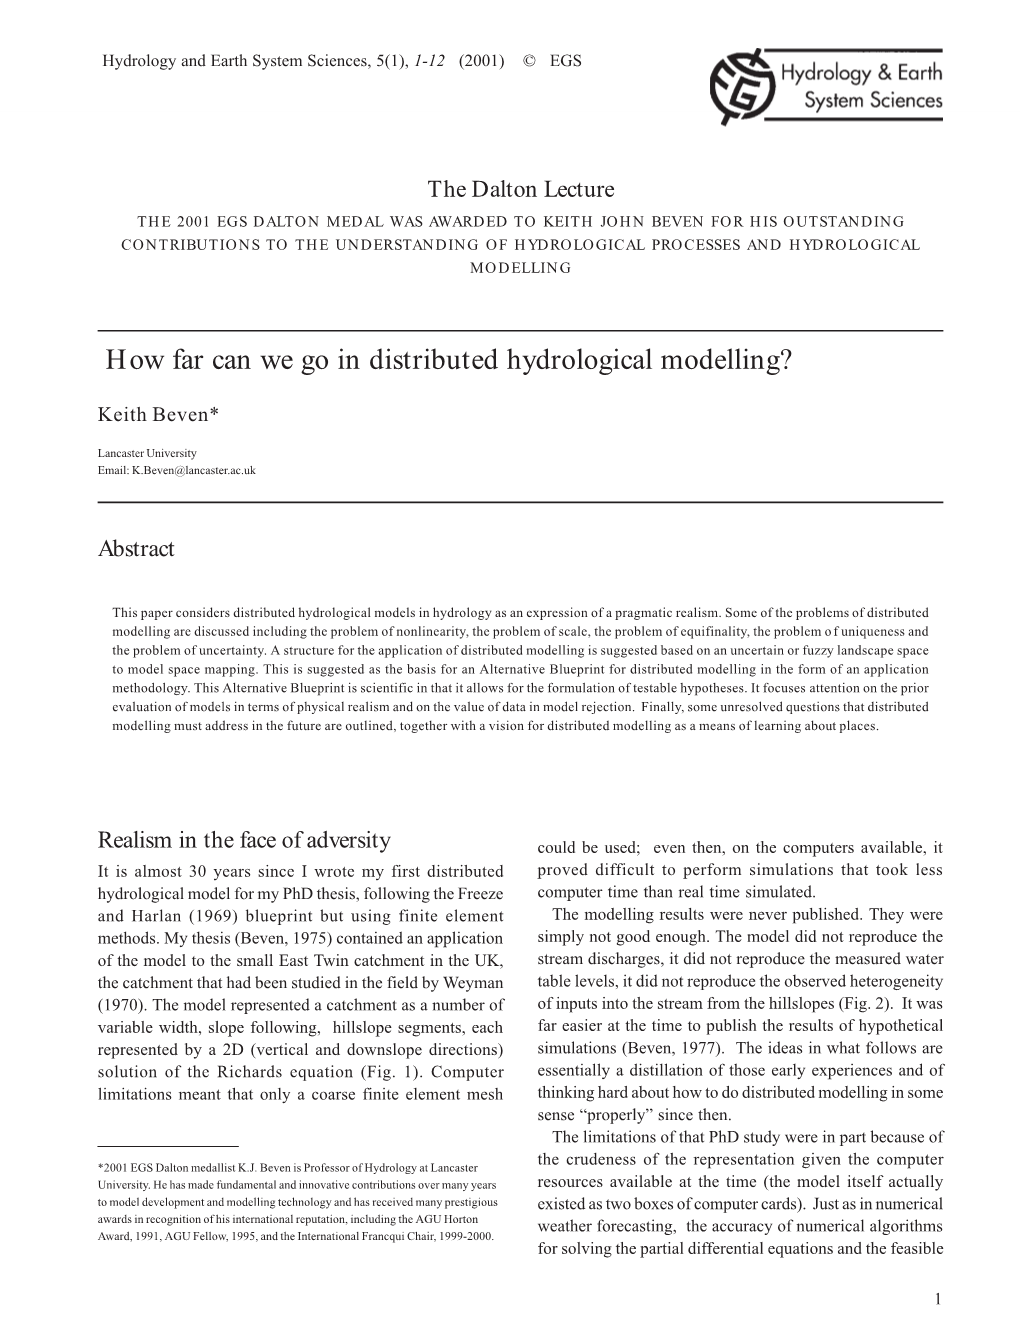 How Far Can We Go in Distributed Hydrological Modelling?